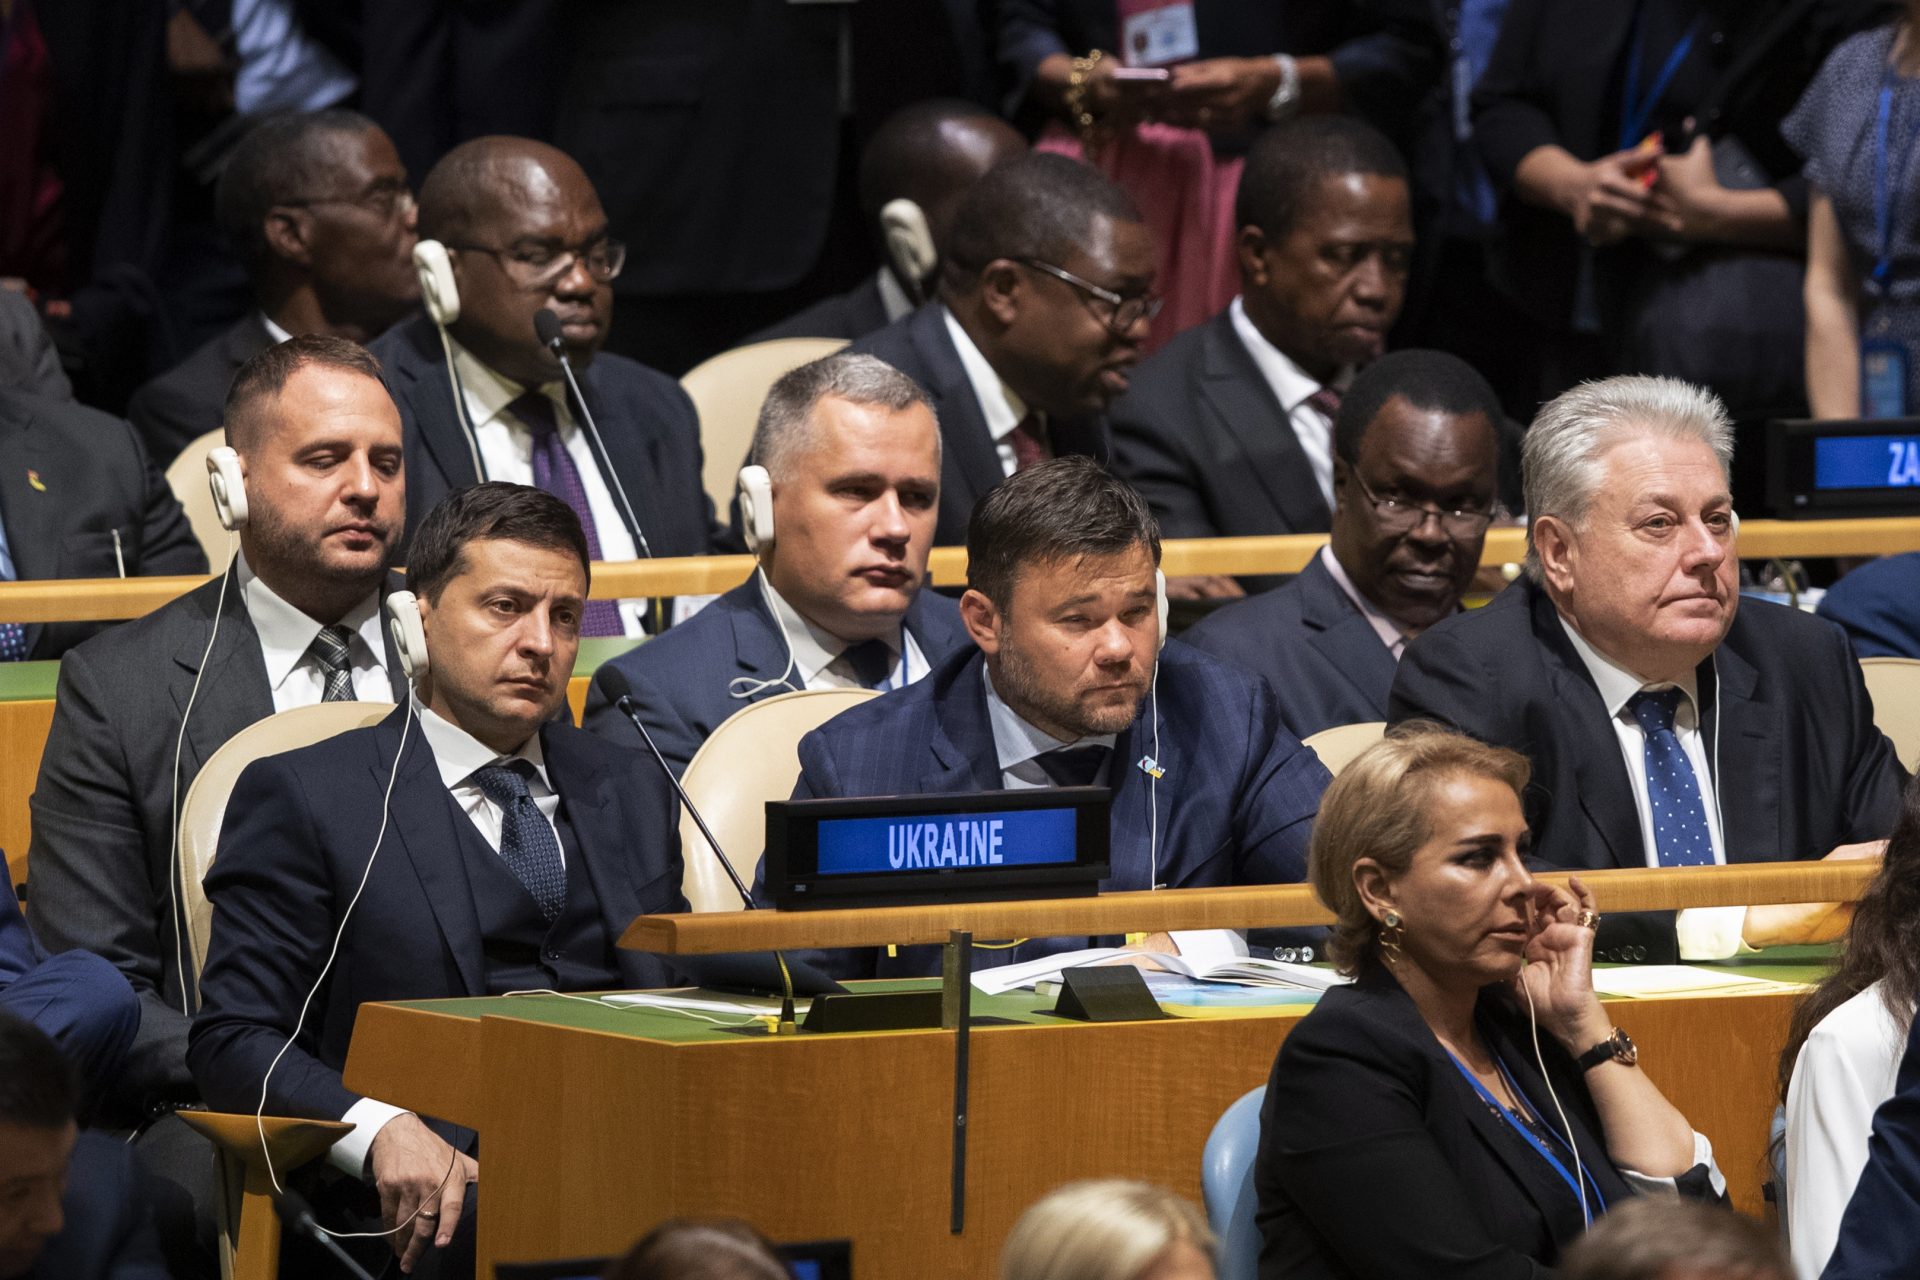 Delegates from Ukraine including President Volodymyr Zelensky, left, and Ambassador to U.N. Volodymyr Yelchenko, right, listen as U.S. President Donald Trump addresses the 74th session of the United Nations General Assembly at U.N. headquarters Tuesday, Sept. 24, 2019.